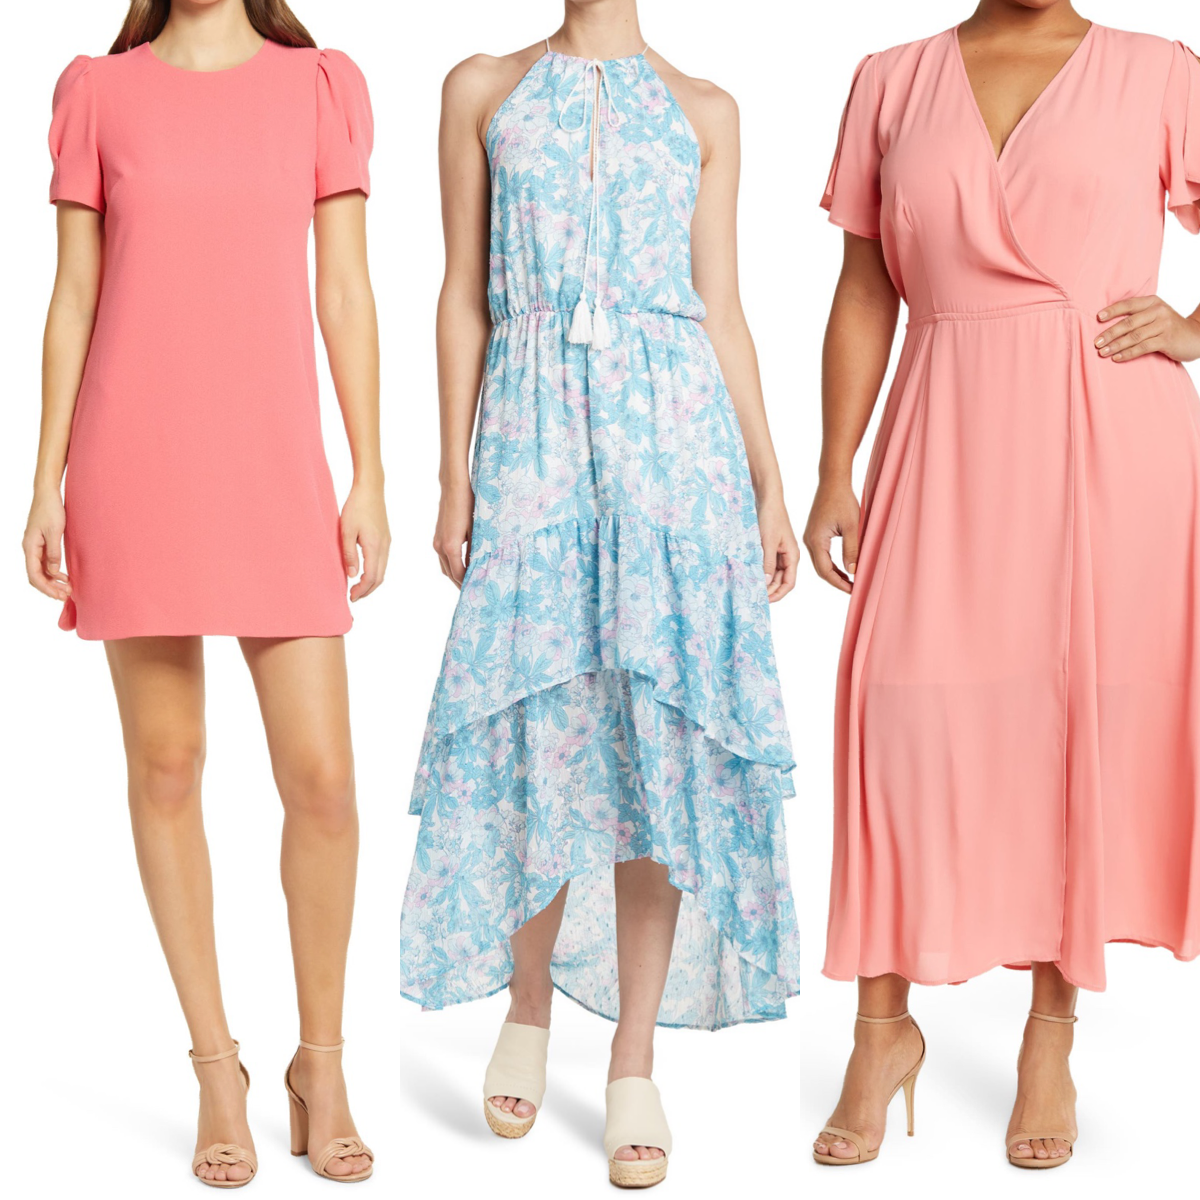 👗NORDSTROM RACK NEW WOMEN'S SPRING DRESS COLLECTION! FASHION DESIGNER  DRESSES FOR LESS! SHOP WITH ME 